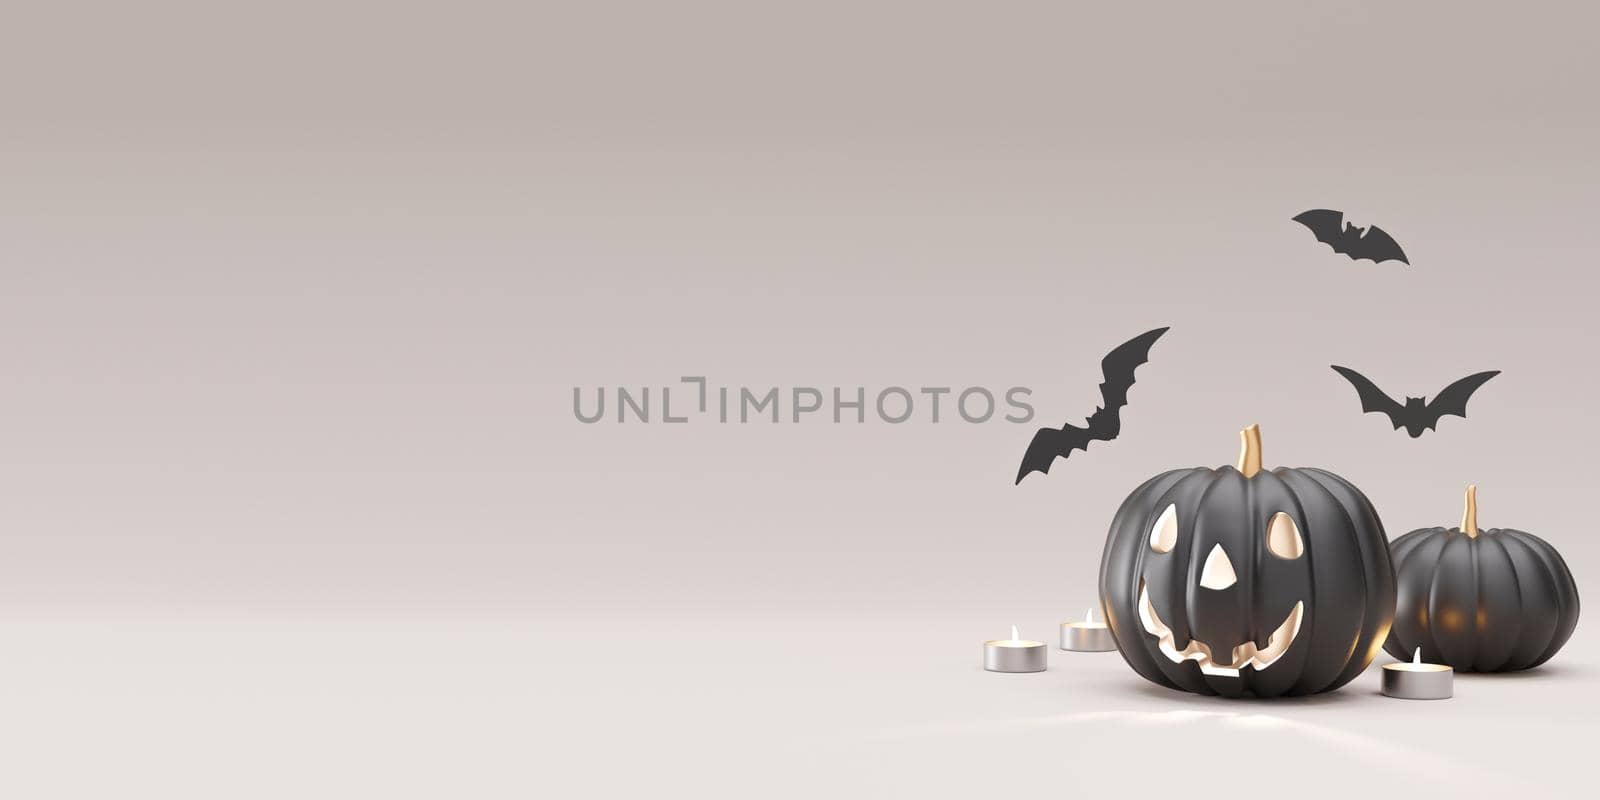 Halloween decoration on gray background. Free, copy space for your text or logo. Halloween banner, mock up design, template for advertising. Black pumpkin, bat, candles. 3D rendering